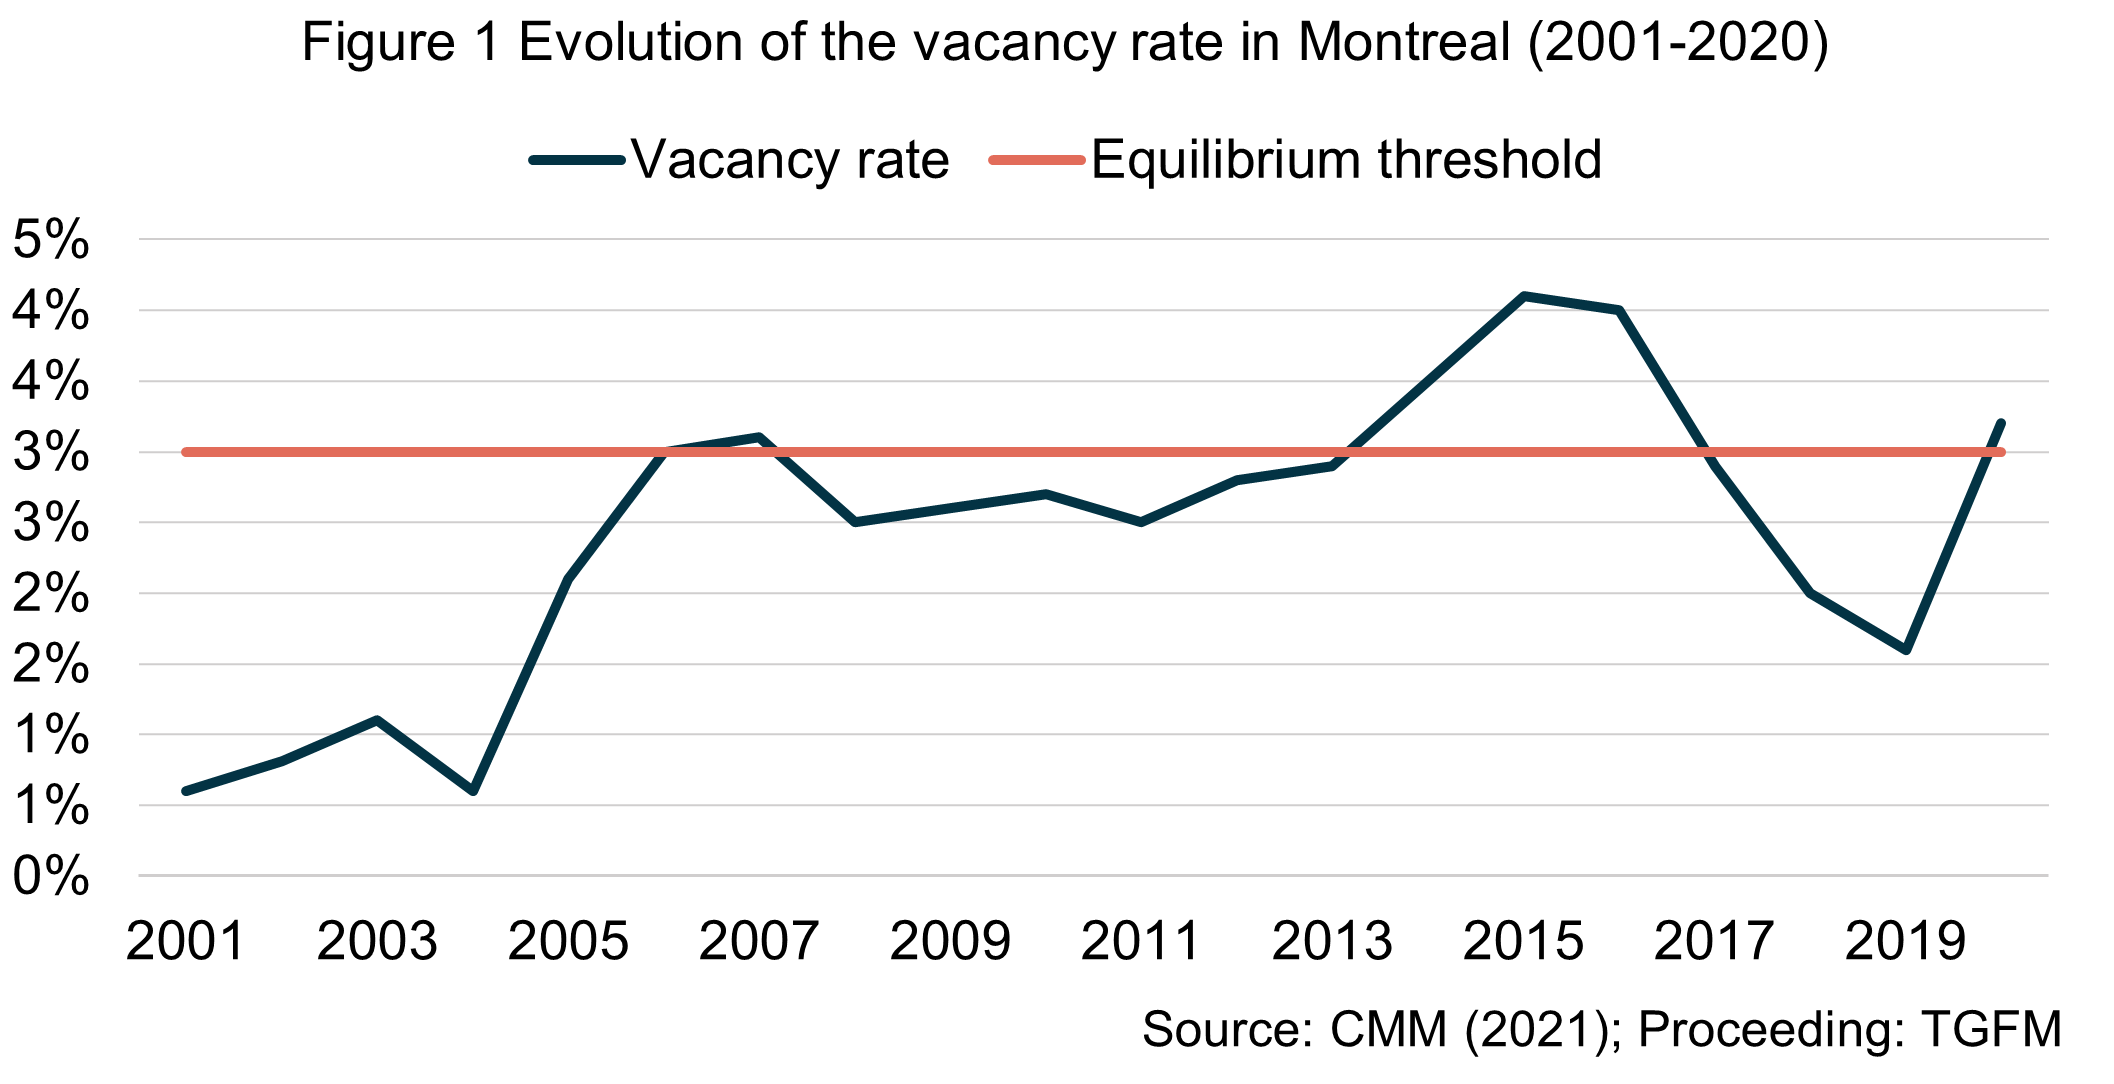 The graph illustrates the evolution of the vacancy rate for rental units from 2001 to 2020. The vacancy rate is below the equilibrium threshold of 3% from 2001 to 2006. From 2006 to 2017, the rate is around the 3% threshold. It dips below 3% again between 2017 and 2019. 